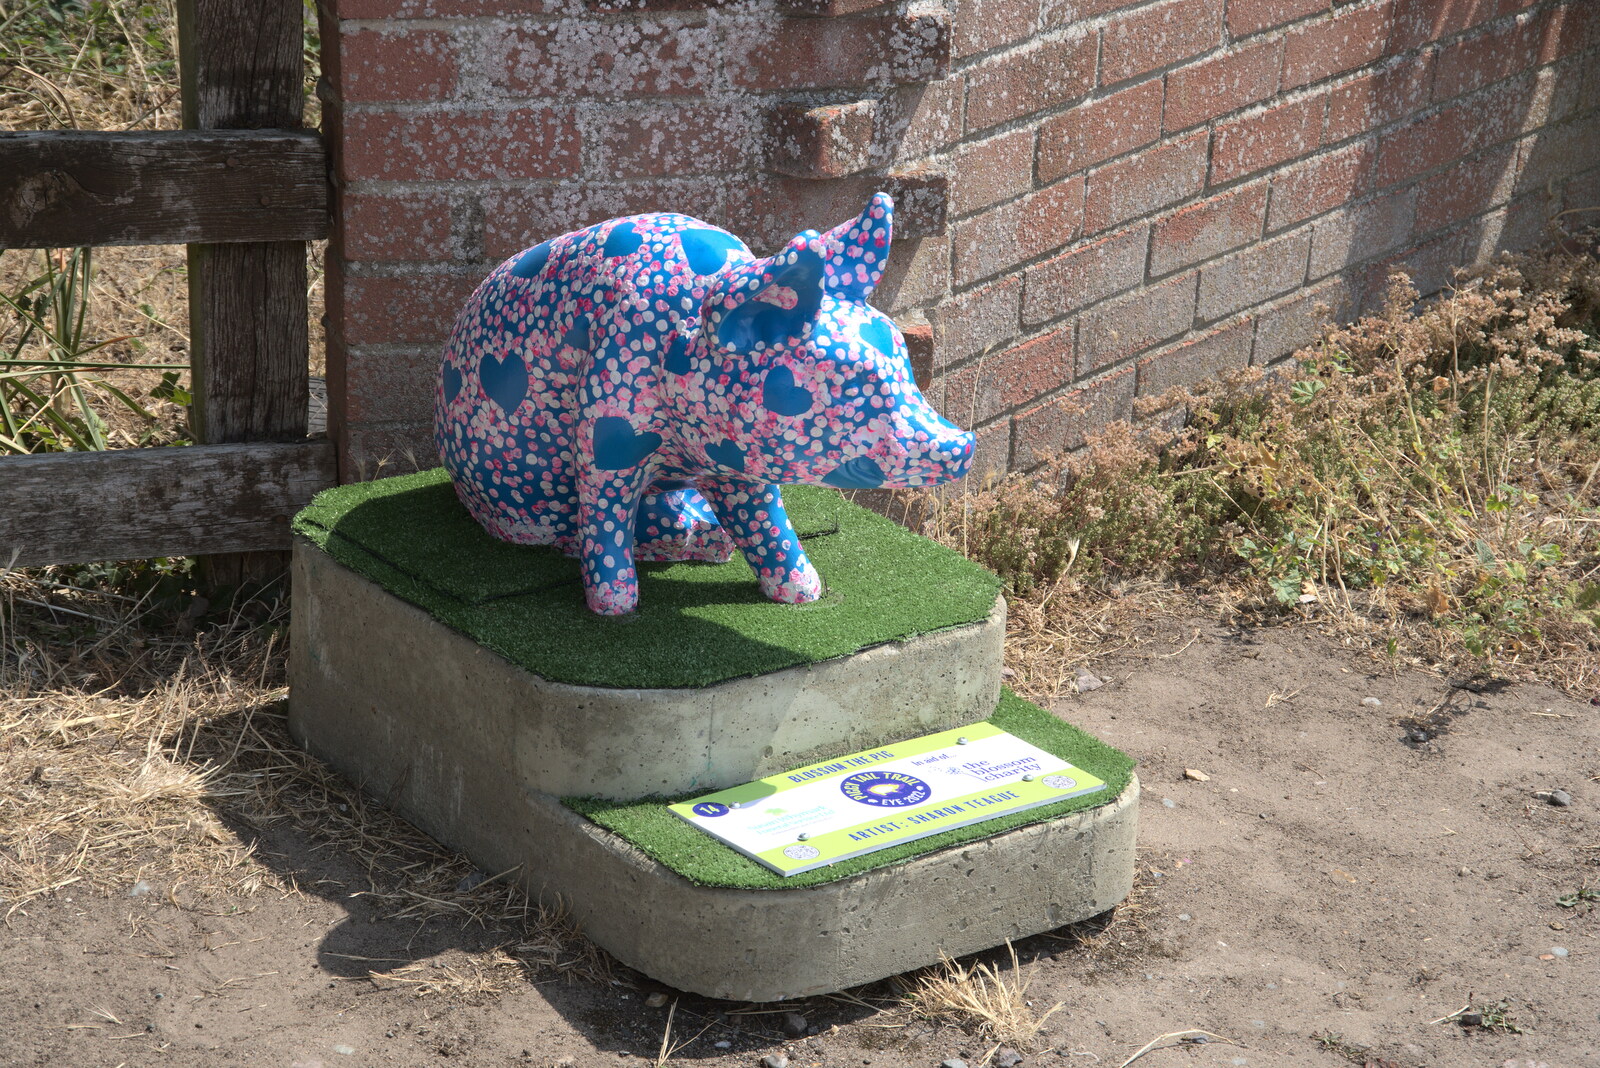 A July Miscellany, Diss, Eye and Norwich - 23rd July 2022: A spotty pig on the Piggy Tail Trail in Eye